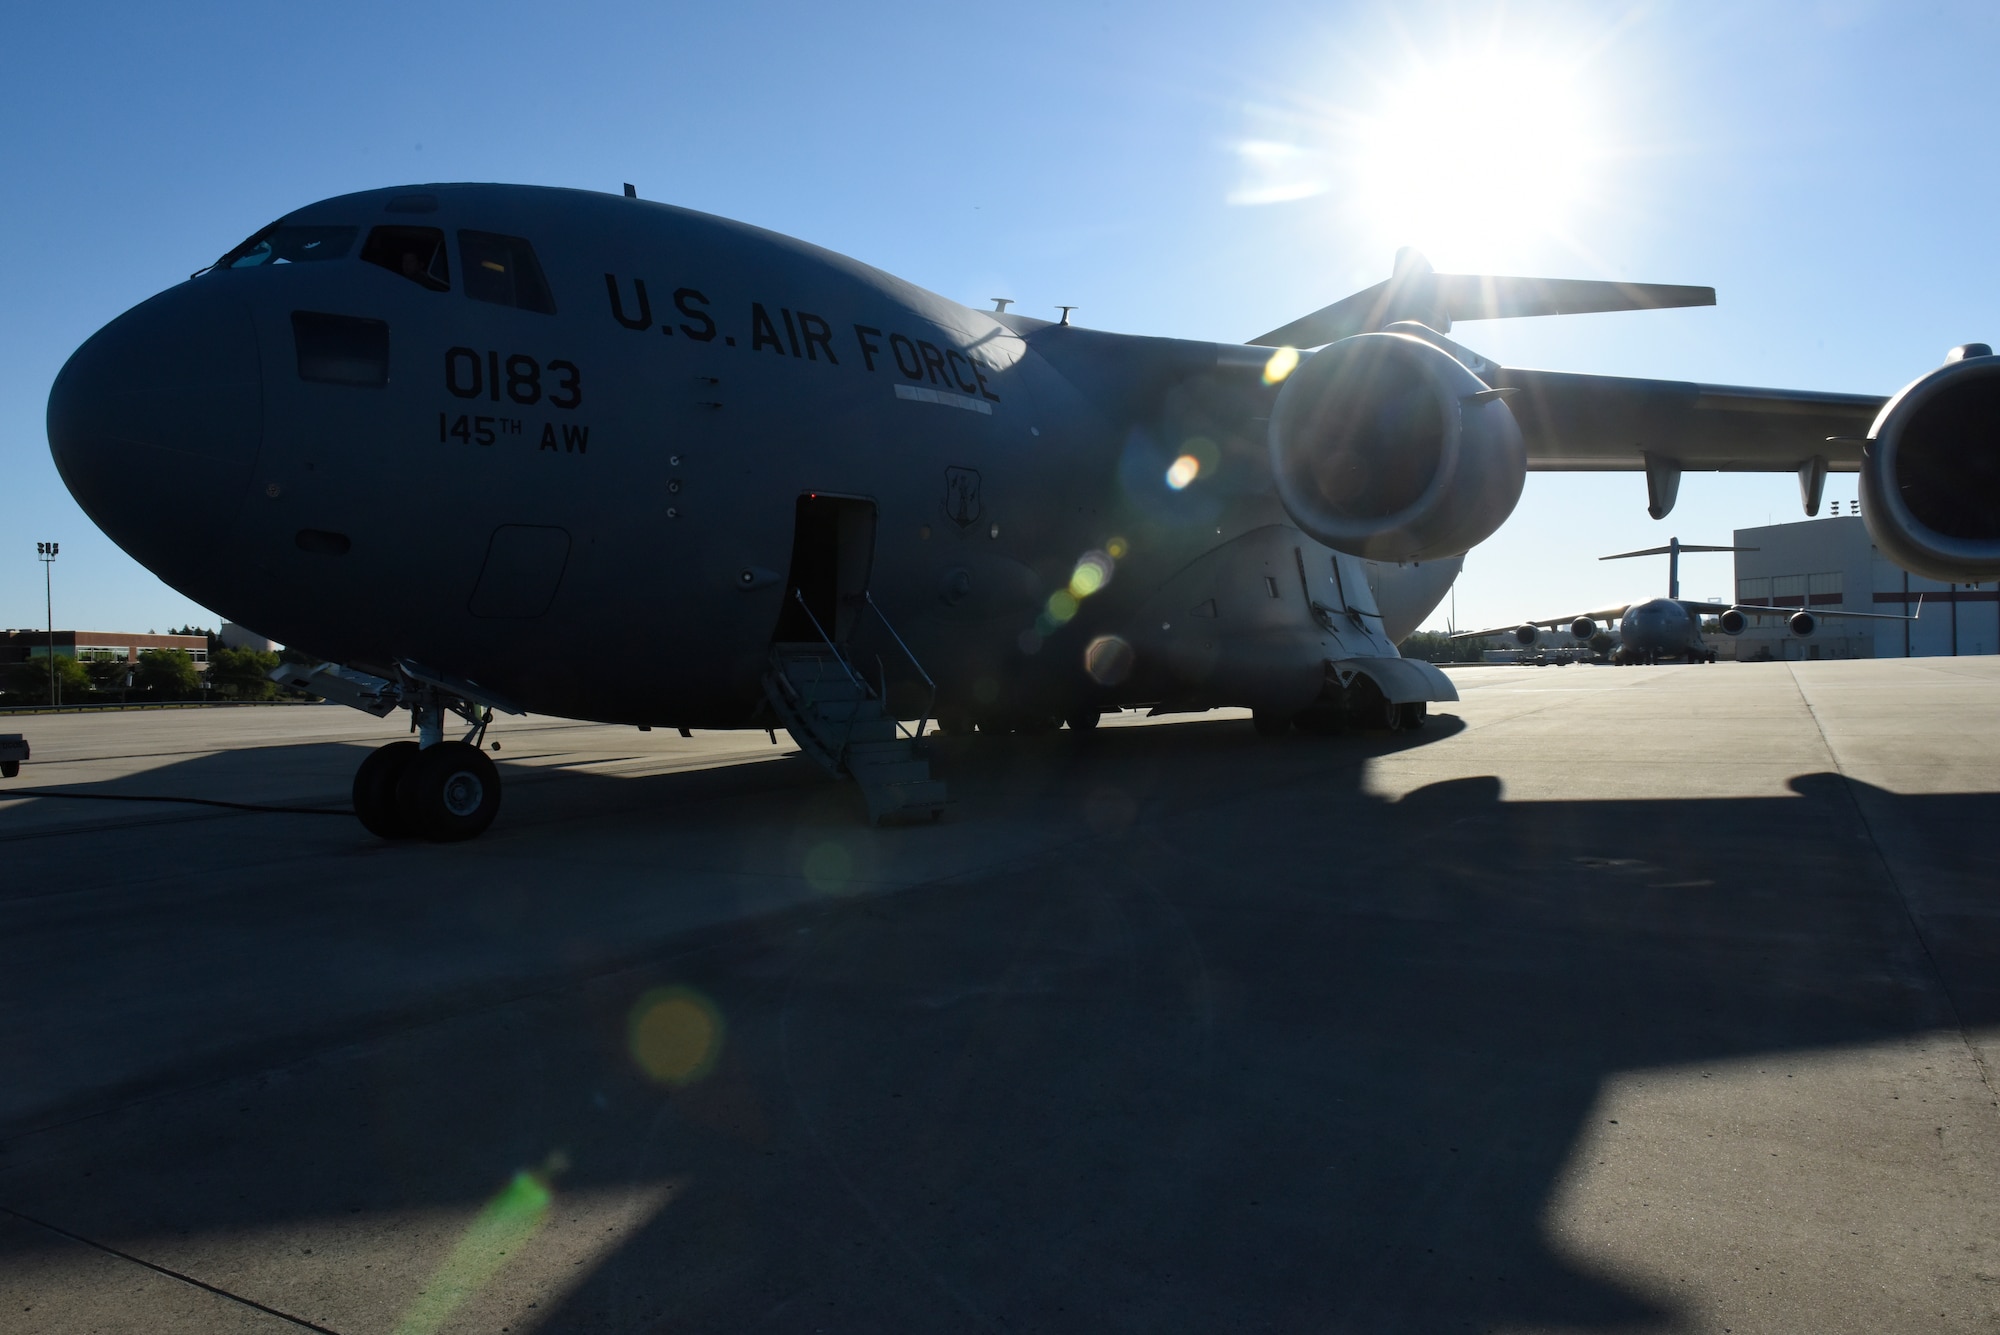 A North Carolina Air National Guard C-17 Globemaster III aircraft sits on the flight line at North Carolina Air National Guard Base, Charlotte Douglas International Airport, as it is prepped for one of its first missions with the 145th Airlift Wing, July 9, 2018. The flight carried members of the 156th Aeromedical Evacuation Squadron to Volk Field Air National Guard Base, Wisconsin, for a training exercise. (U.S. Air Force photo by Tech. Sgt. Nathan Clark)